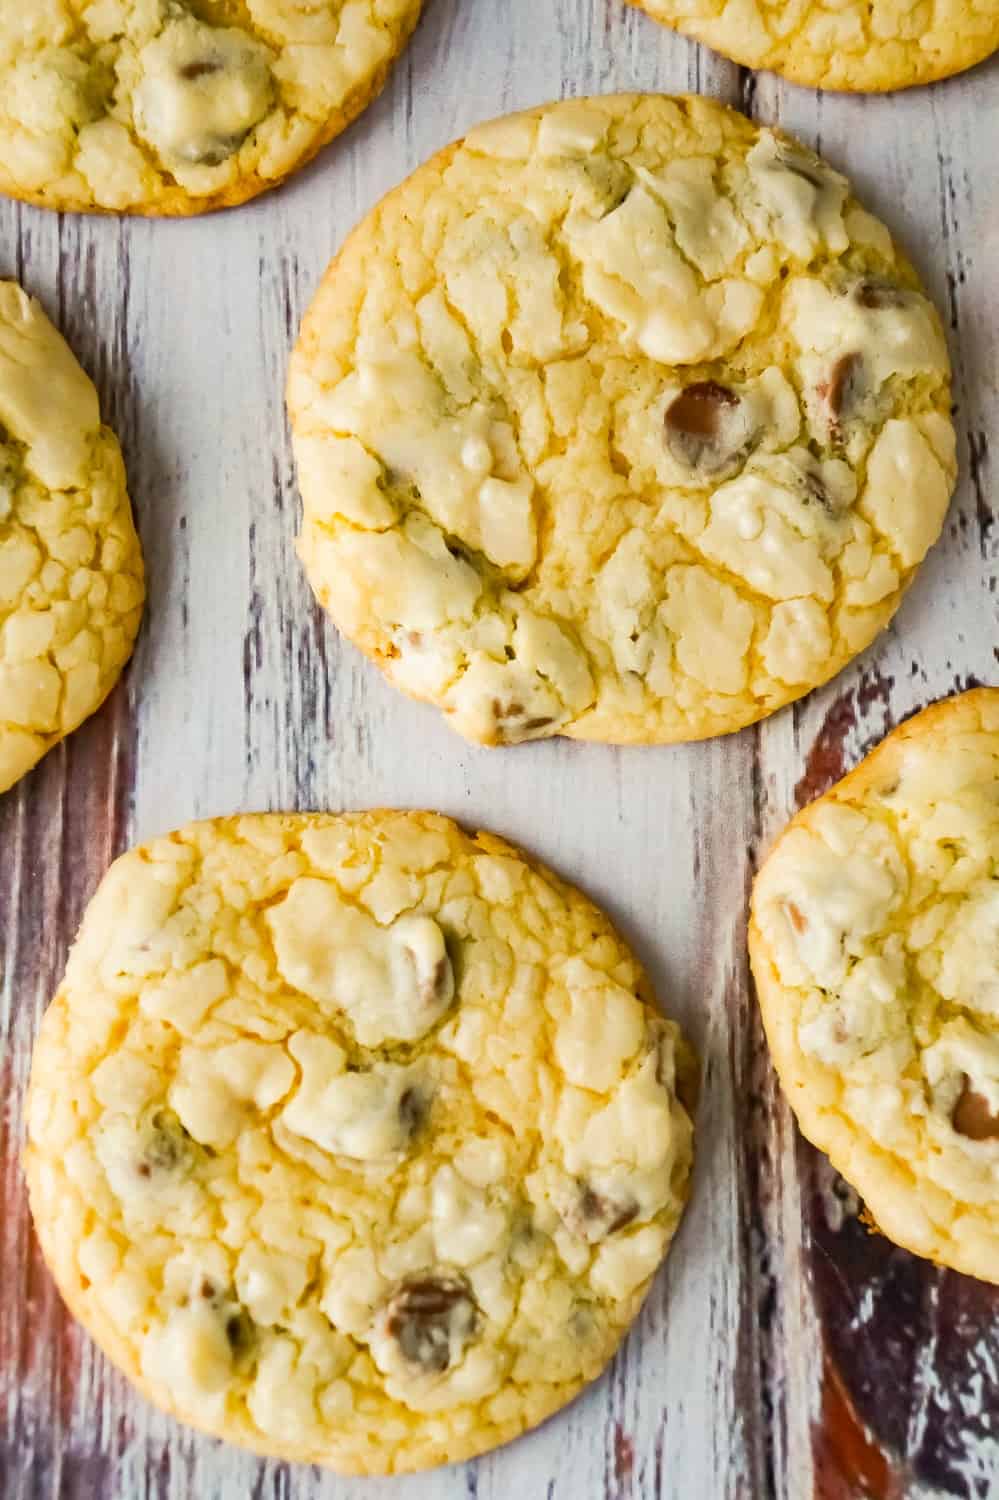 Cake Mix Chocolate Chip Cookies are a quick and easy cookie recipe. These tasty cookies are made with yellow cake mix and loaded with milk chocolate chips.